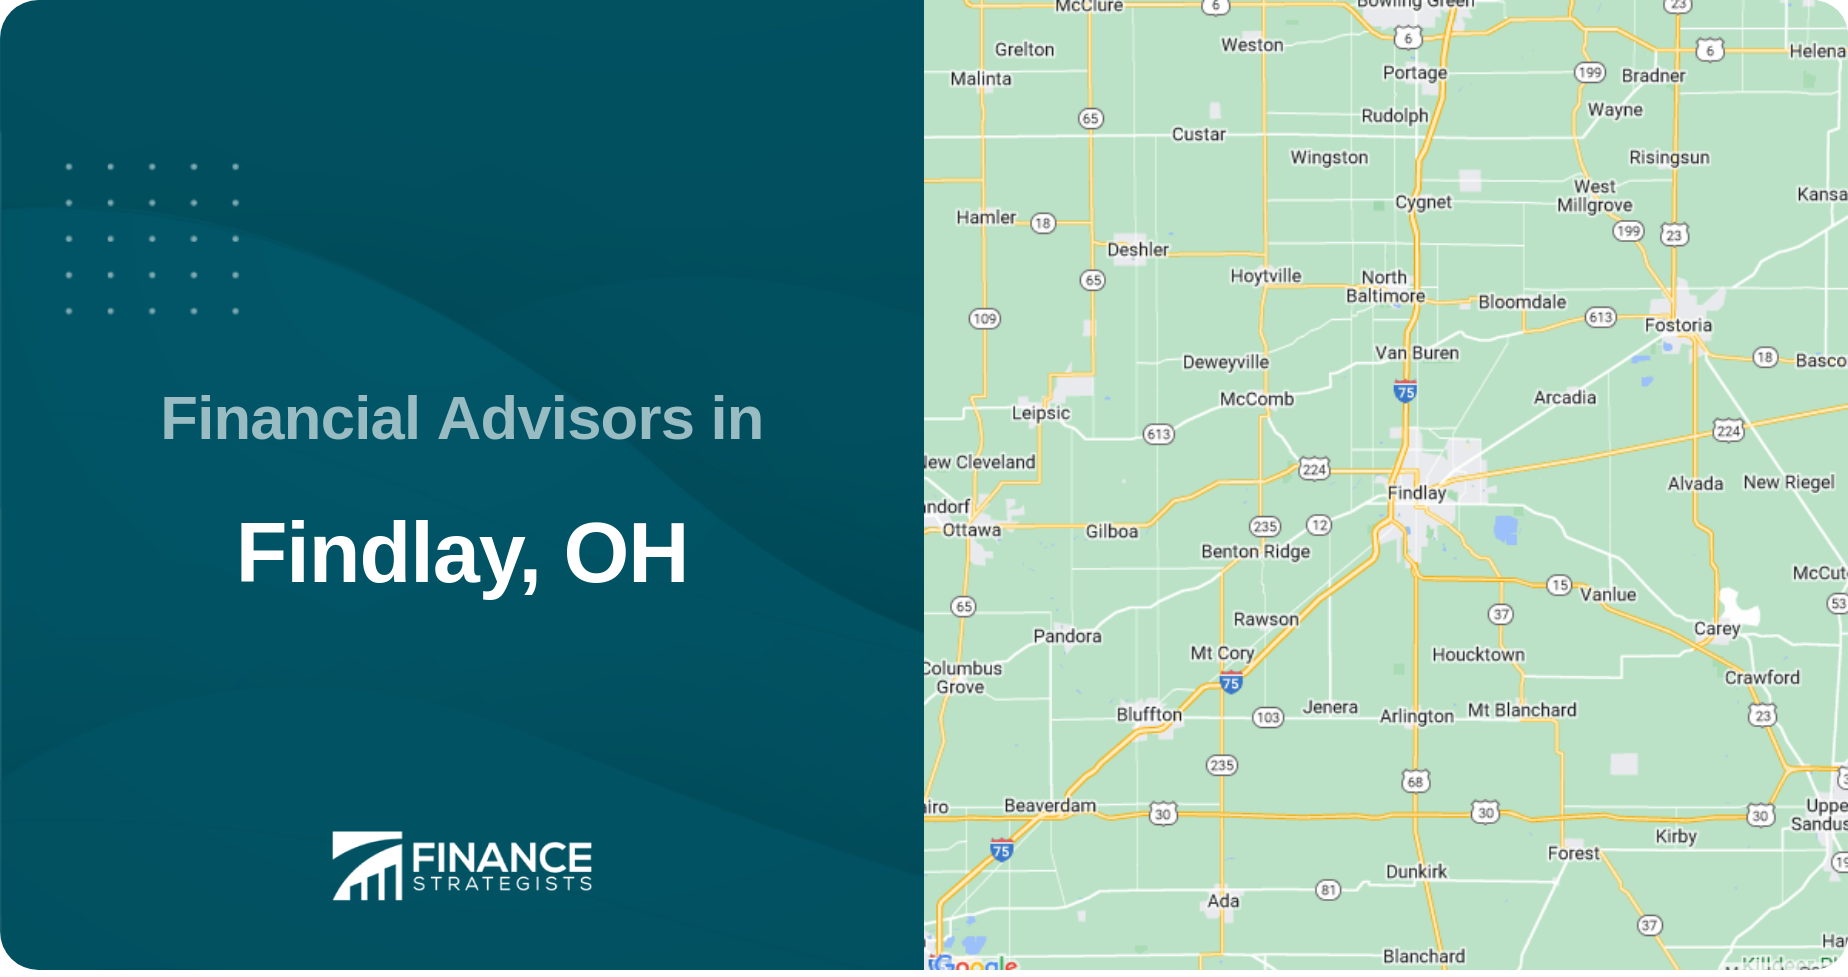 Financial Advisors in Findlay, OH